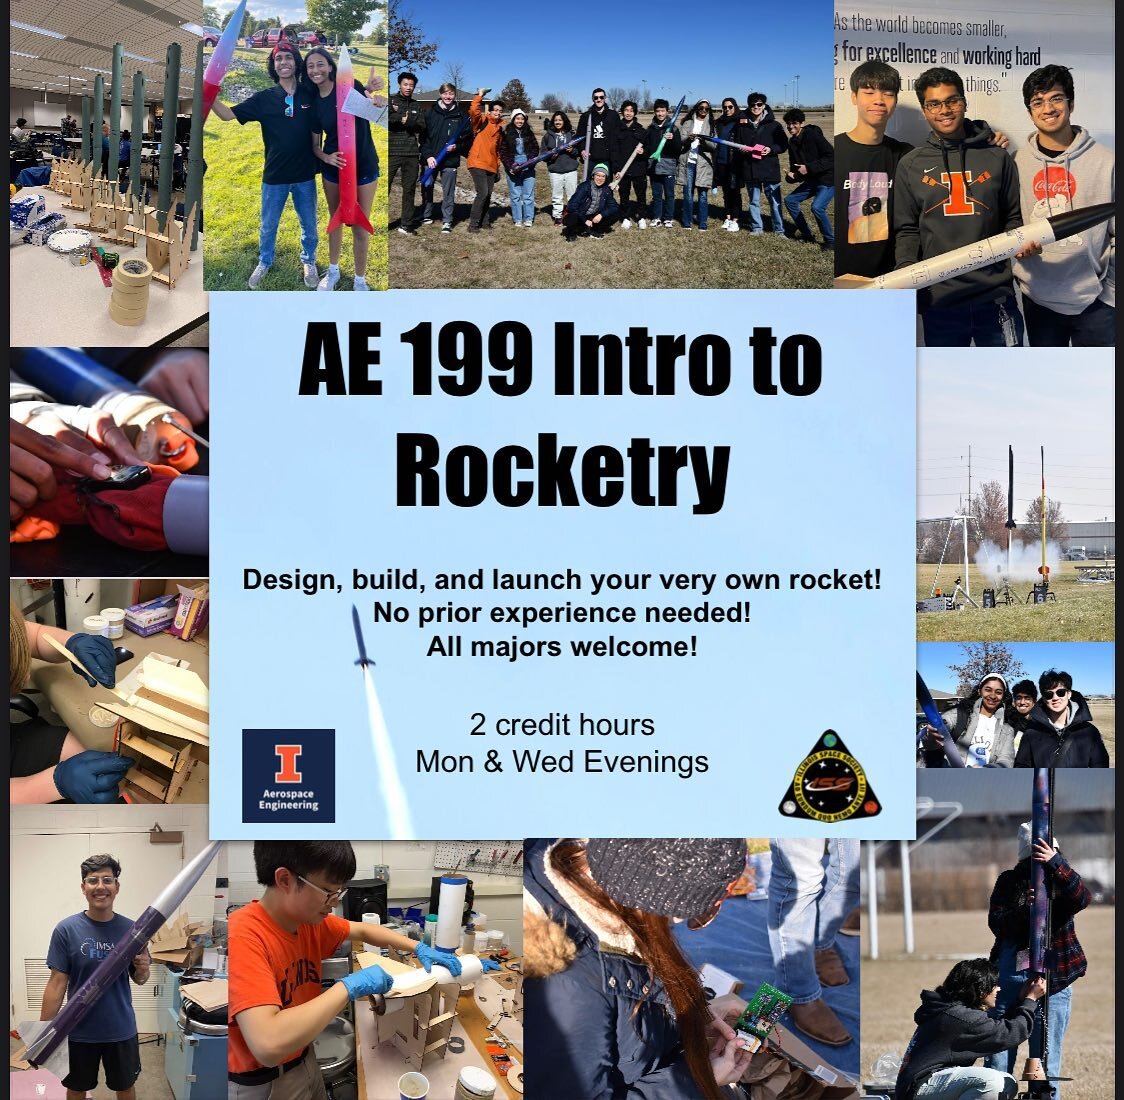 Happy Friday folks! Here&rsquo;s a reminder that you should register for AE - 199 Introduction to Rocketry! AE 199 is a student led class worth 2 credits hours to give any major or year an introduction to building their own F class motor rocket (larg